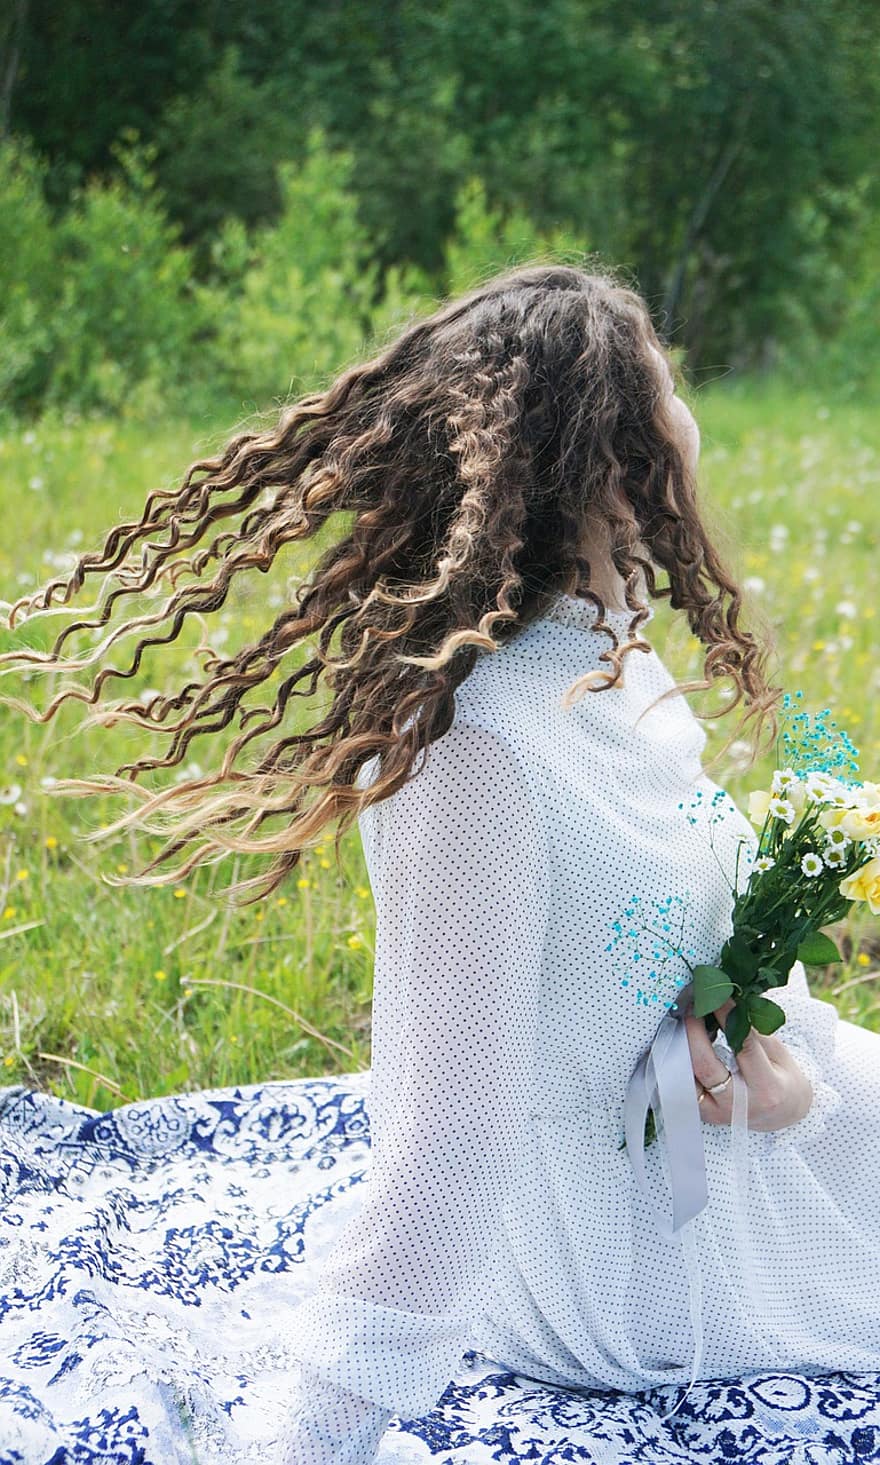 Girl, Curly Hair, White Dress, Hairstyle, Fashion, Style, Nature, Dress, Woman, Summer, Flowers